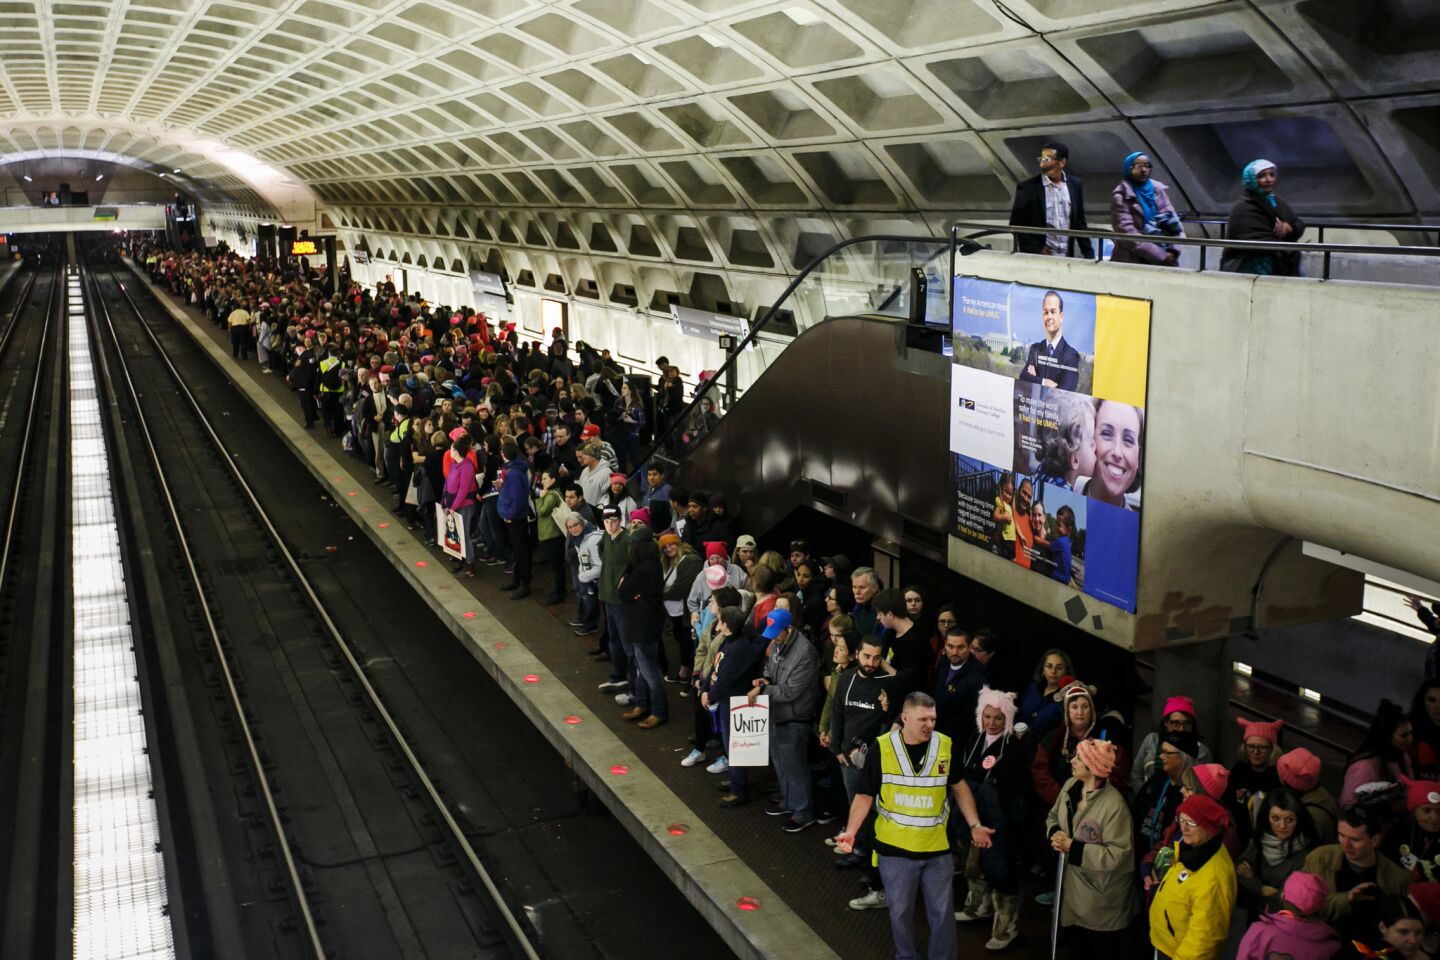 Large crowds of people pack the L'Enfant Plaza metro station after the Women's March on Washington event Saturday afternoon.